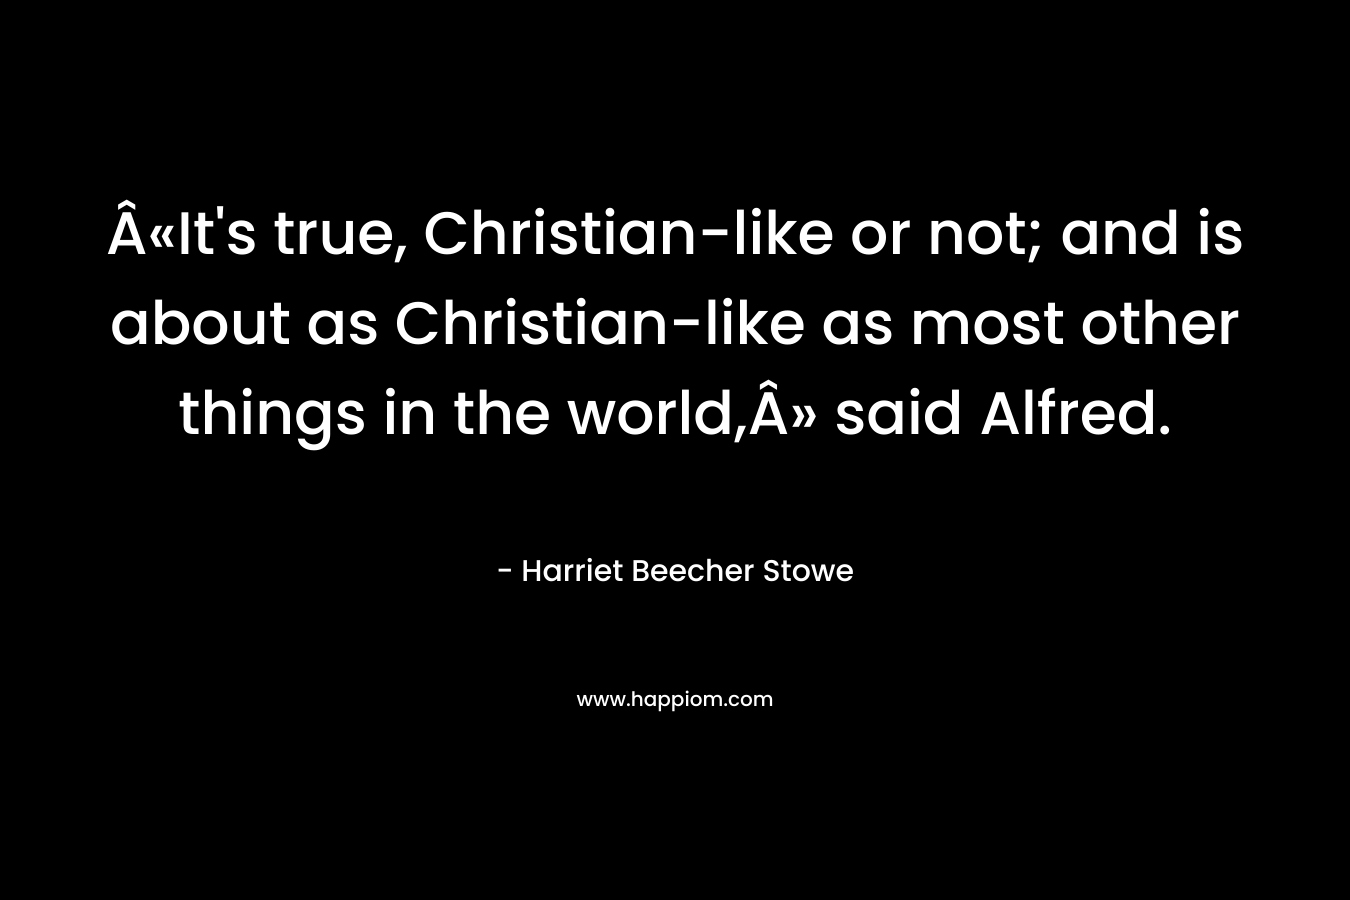 Â«It’s true, Christian-like or not; and is about as Christian-like as most other things in the world,Â» said Alfred. – Harriet Beecher Stowe